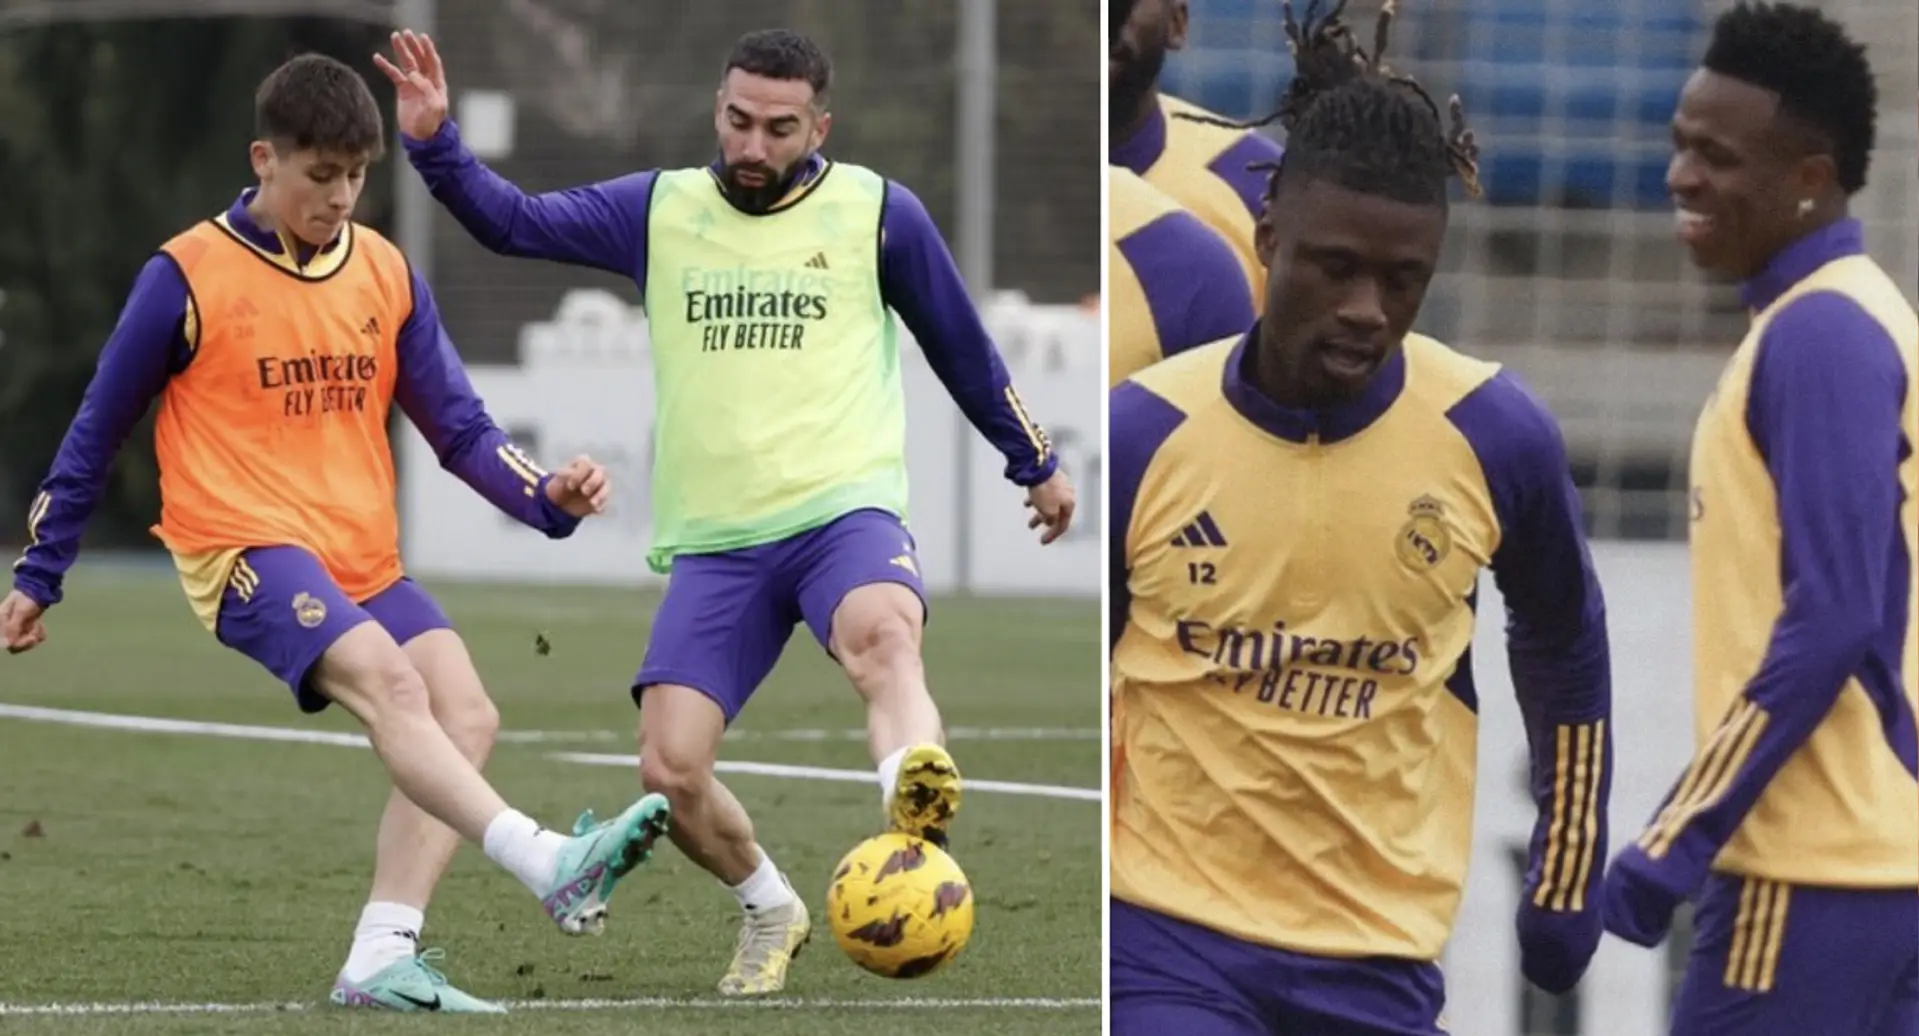 Real Madrid players return to training after Christmas break, 4 injured players back